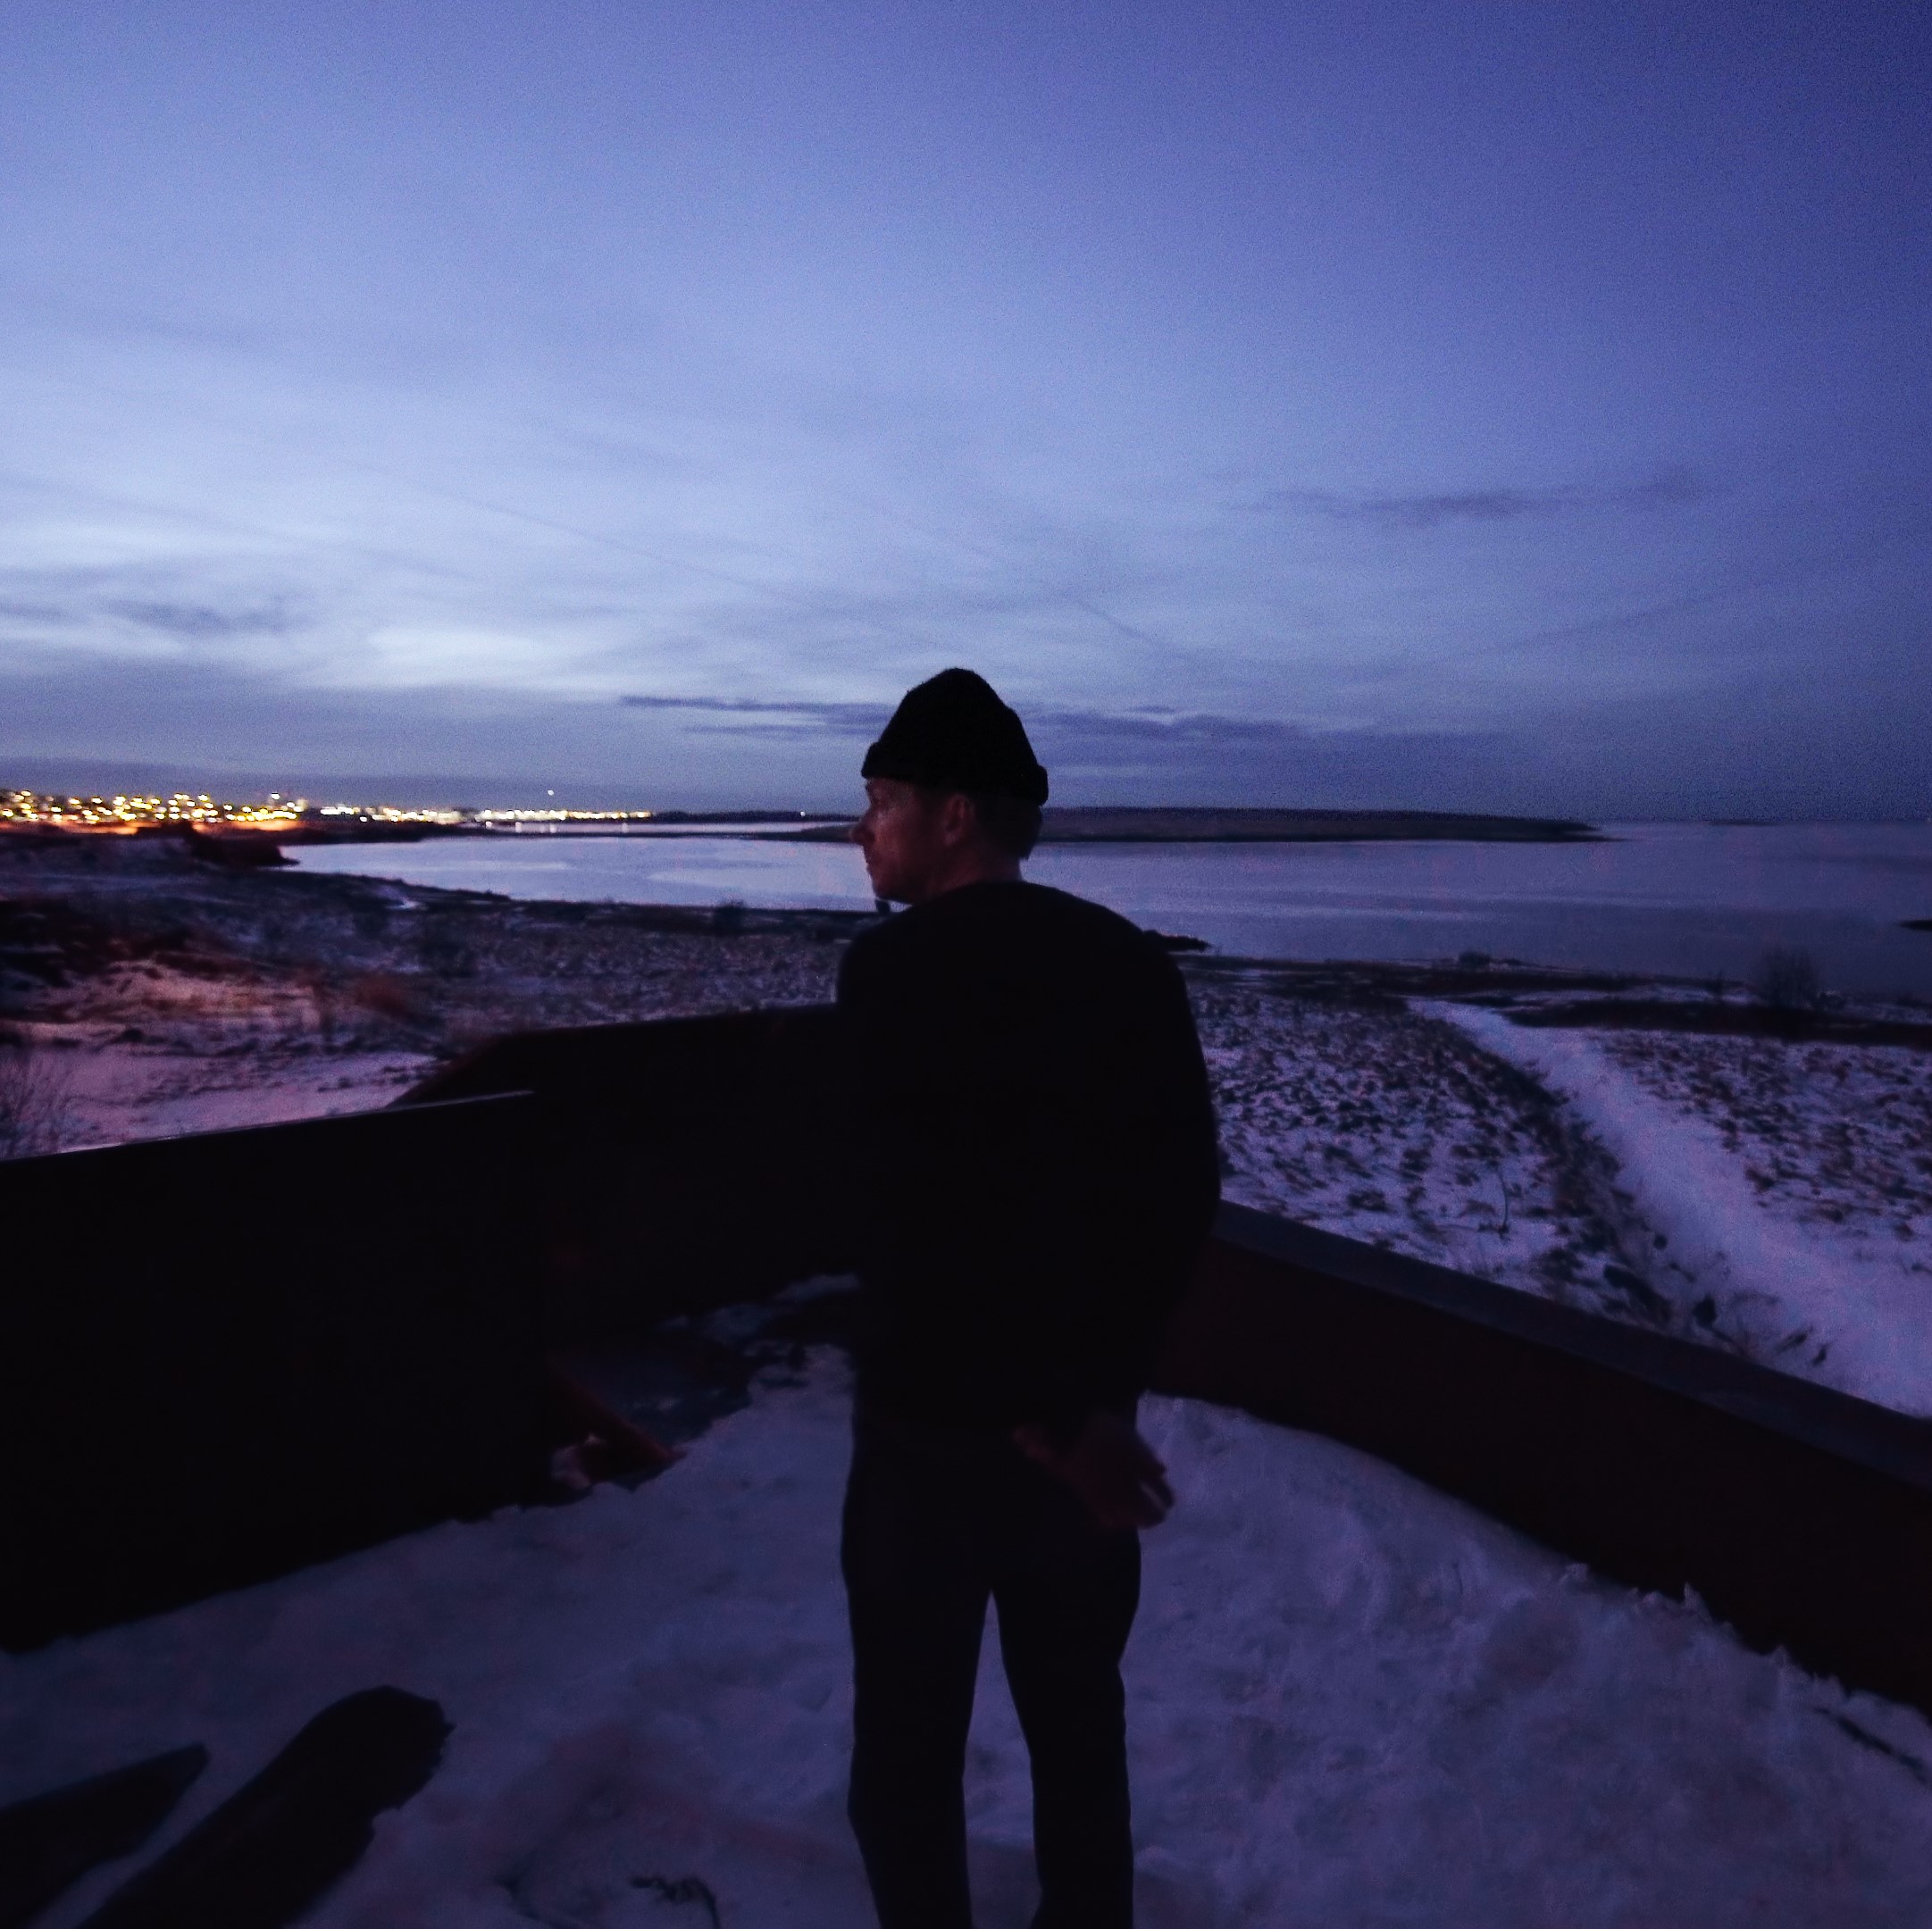 Damon Albarn outside in twilight, with snow and view of bay. Photo credit: Matt Cronin